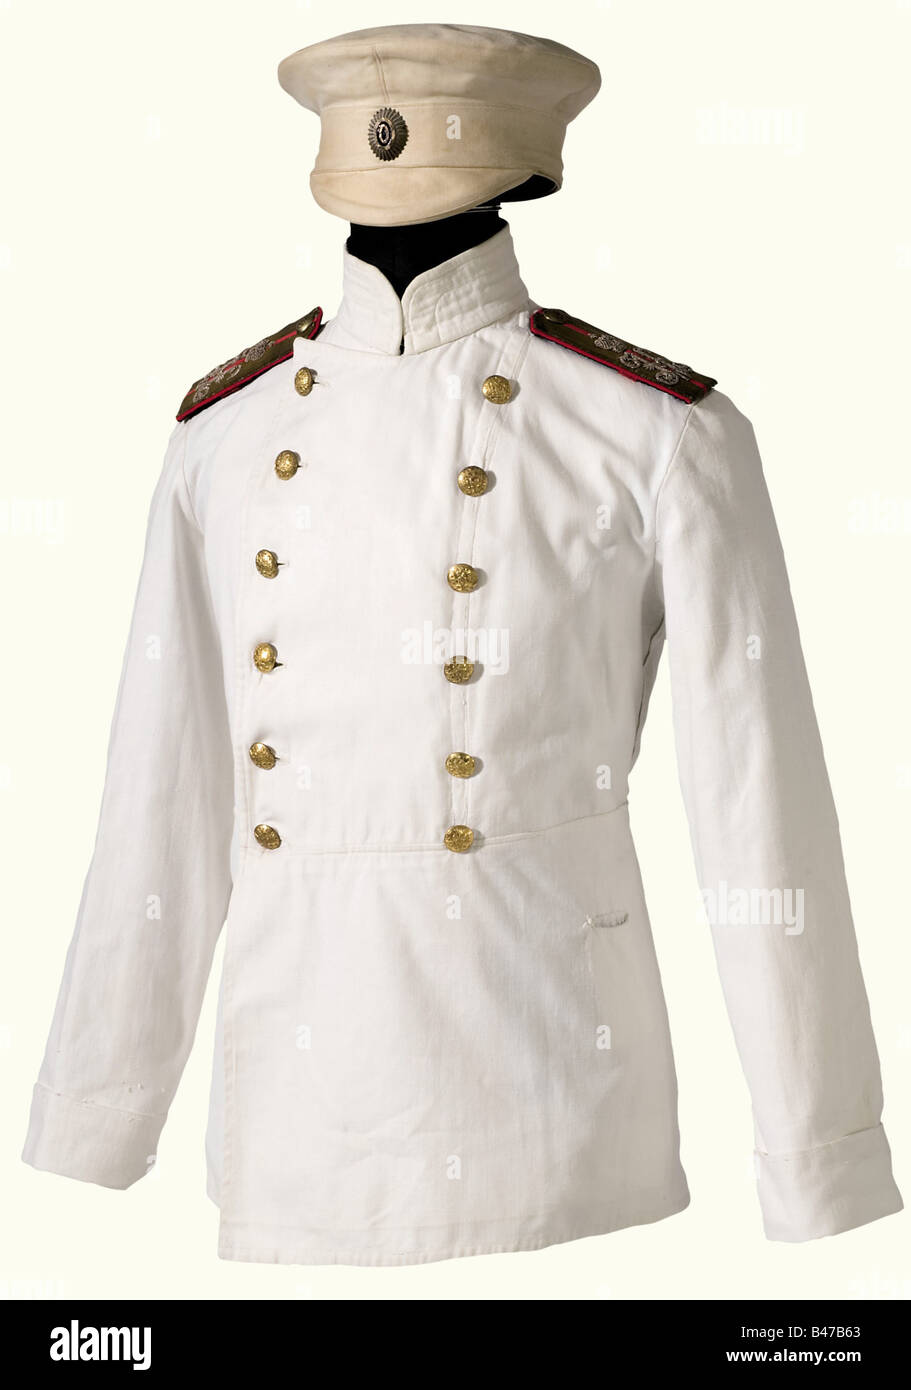 A summer service cap for an officer, Russia, in the style worn ca. 1870 - 1907. Service cap of white linen material, laquered cockade and a small leather visor. Beige lining with traces of wear and a brown leather sweatband. Collector replica of a summer jacket made of white linen material with two rows of original, gilded buttons. Broad, slip-on shoulder boards with later added cipher 'N II' and backing. Size L. historic, historical, 1900s, 20th century, 19th century, uniform, uniforms, clothes, outfit, outfits, textile, object, objects, stills, clipping, clip, Stock Photo